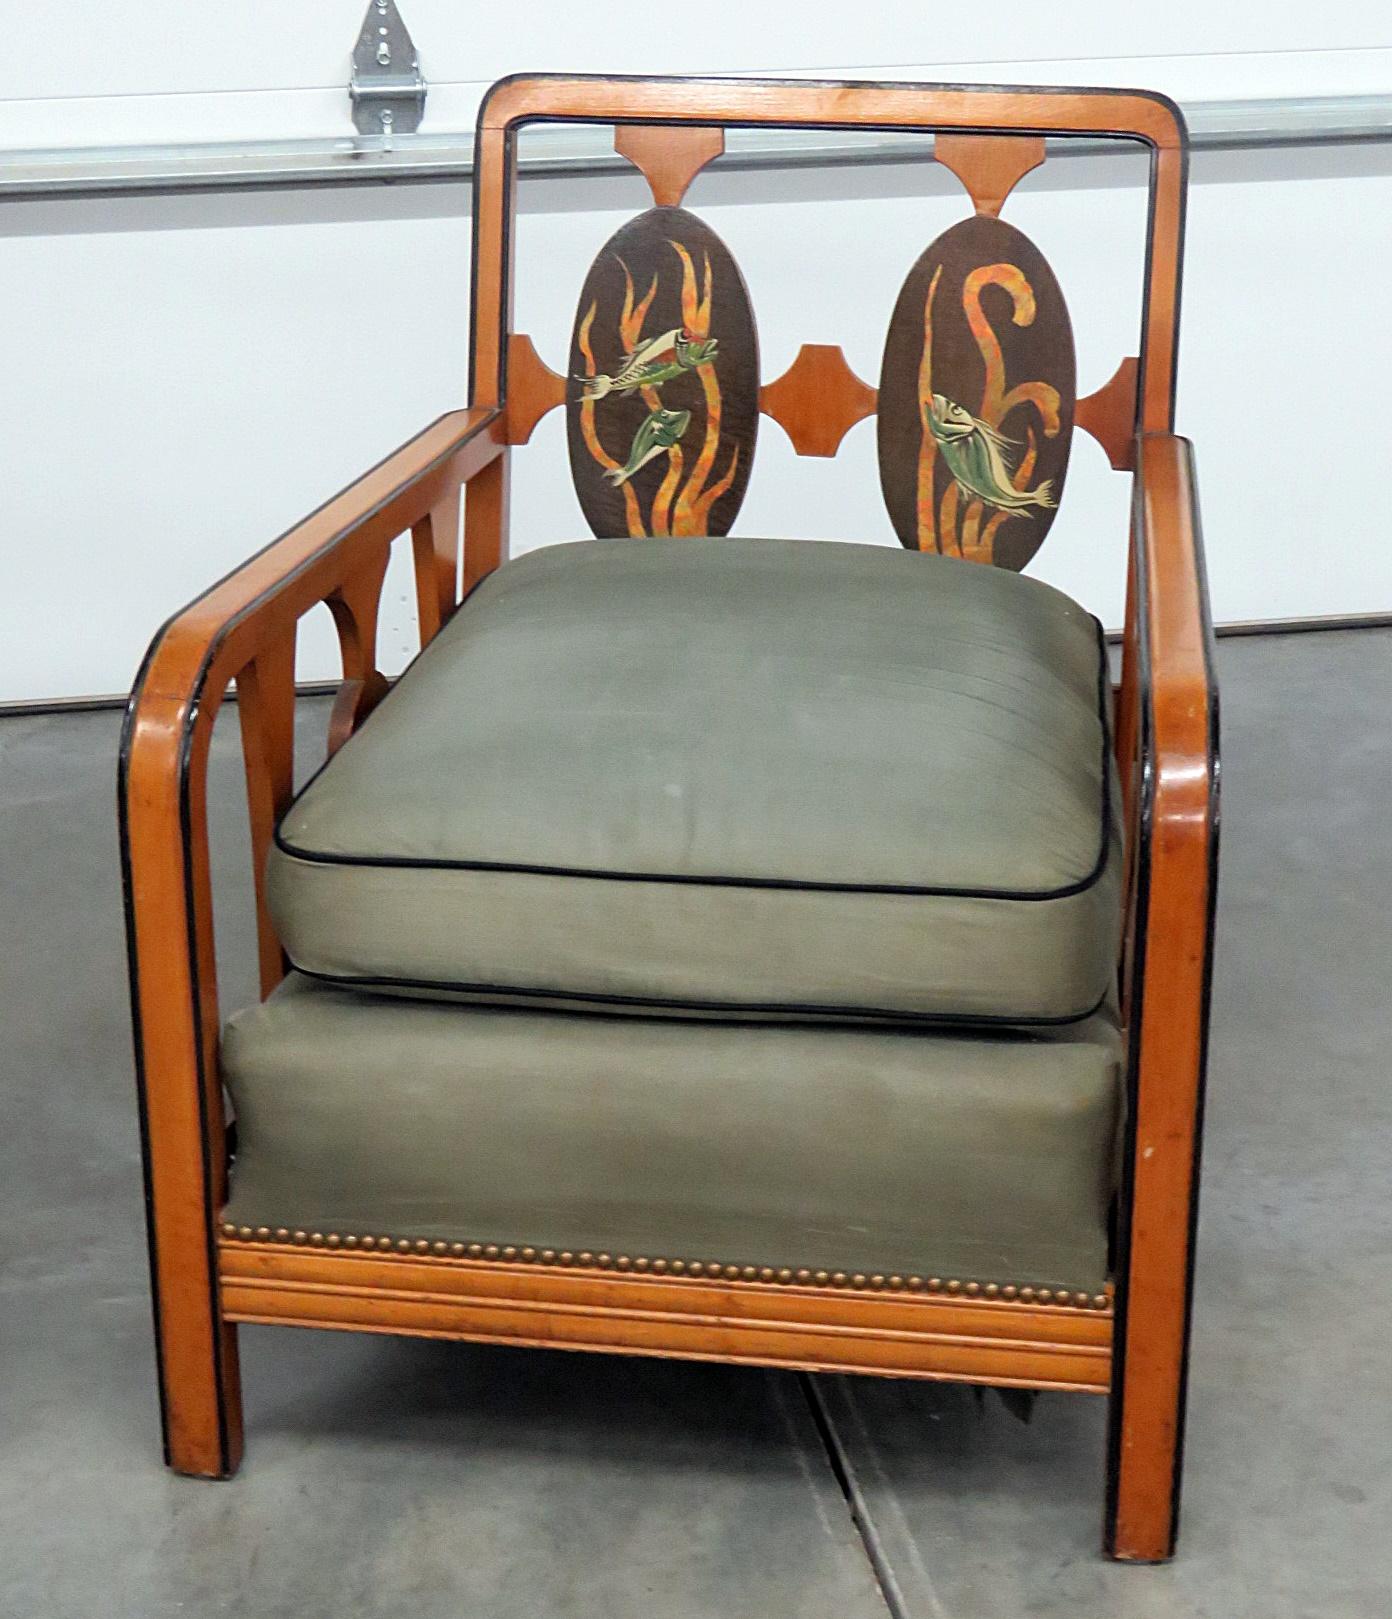 Companion pair of Art Deco armchairs, with a painted fish design, ebonized accents, and nailhead trim. One chair measures 38